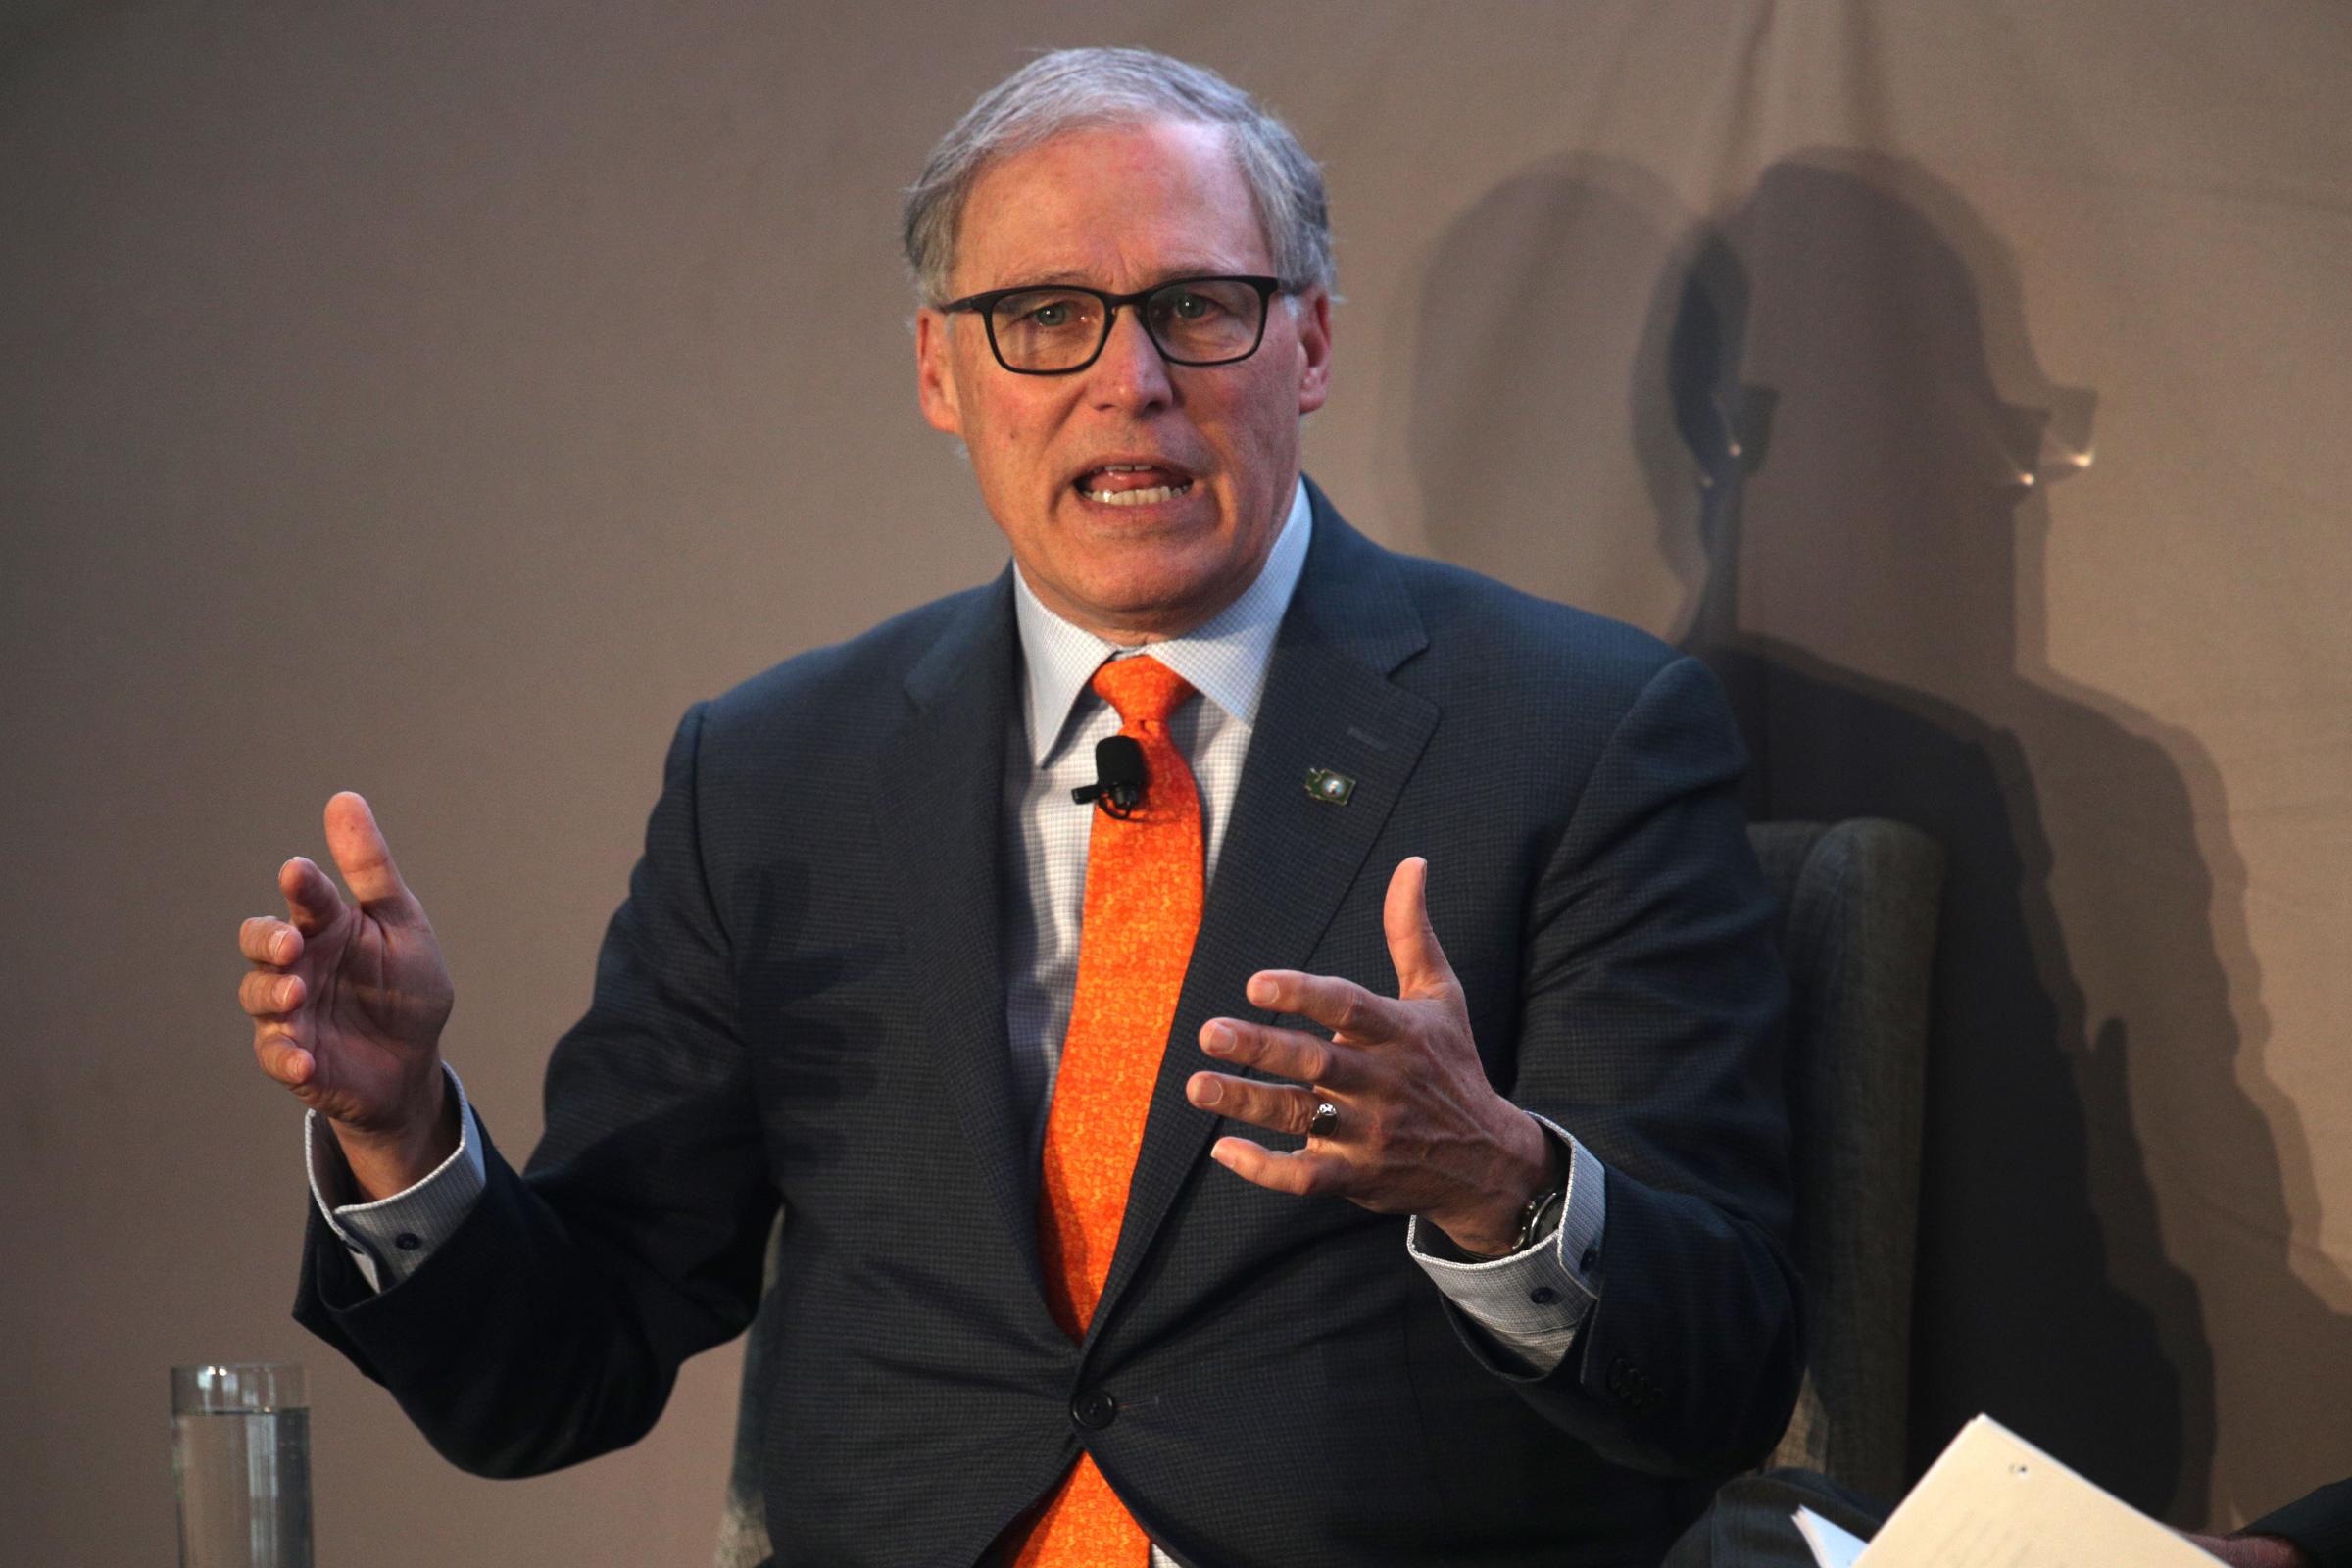 Washington Governor Jay Inslee Delivers Keynote Remarks At Renewable Energy Policy Forum